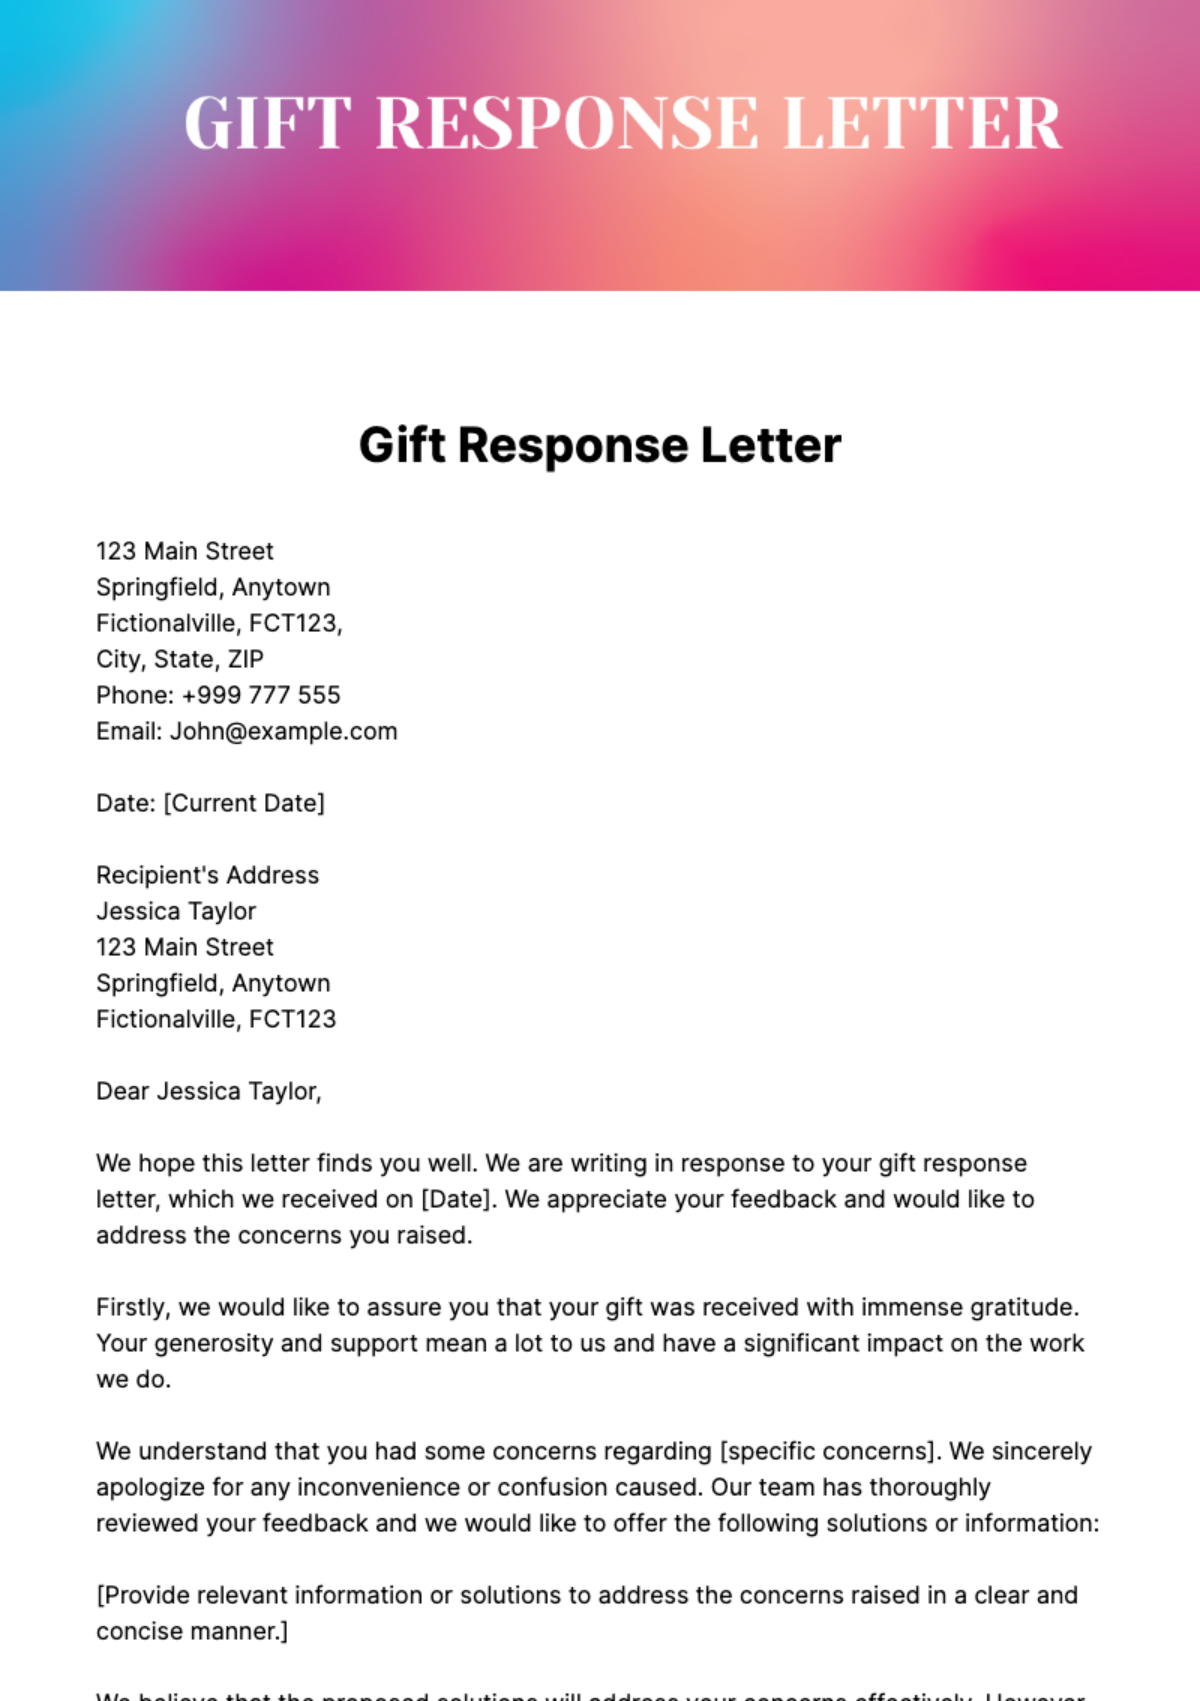 Free Gift Response Letter Template